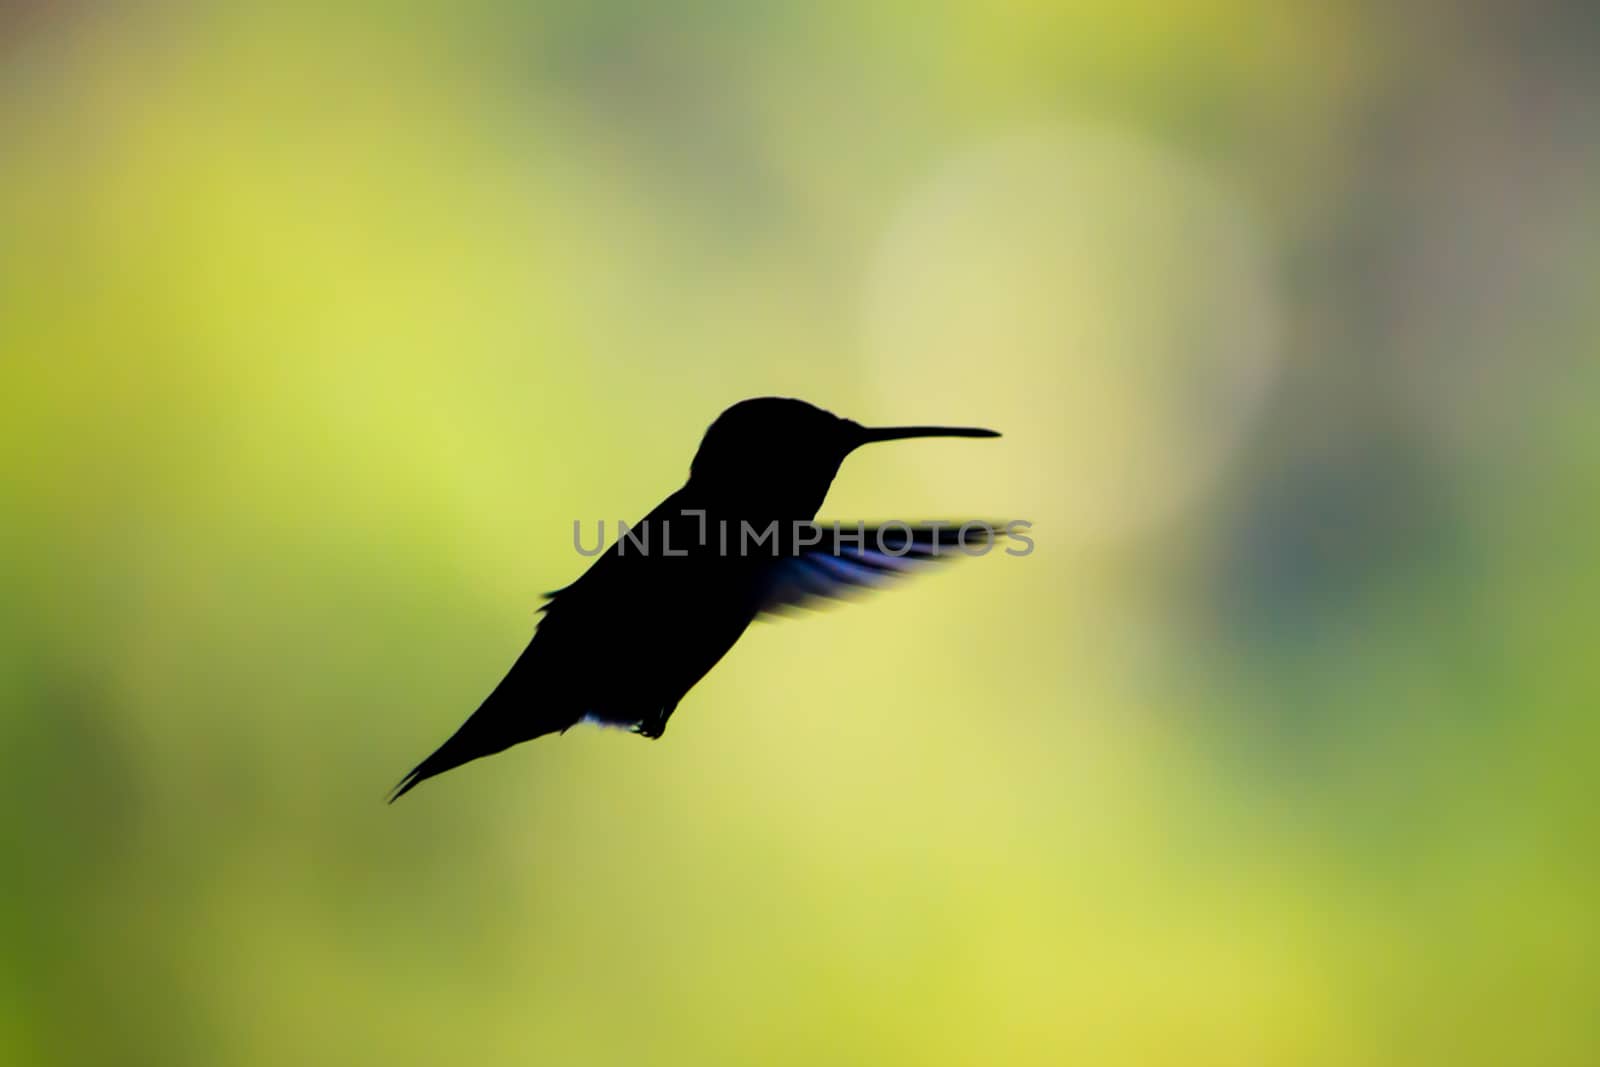 Hummingbird in flight and silhouette on a green background. copy space provided. by kb79